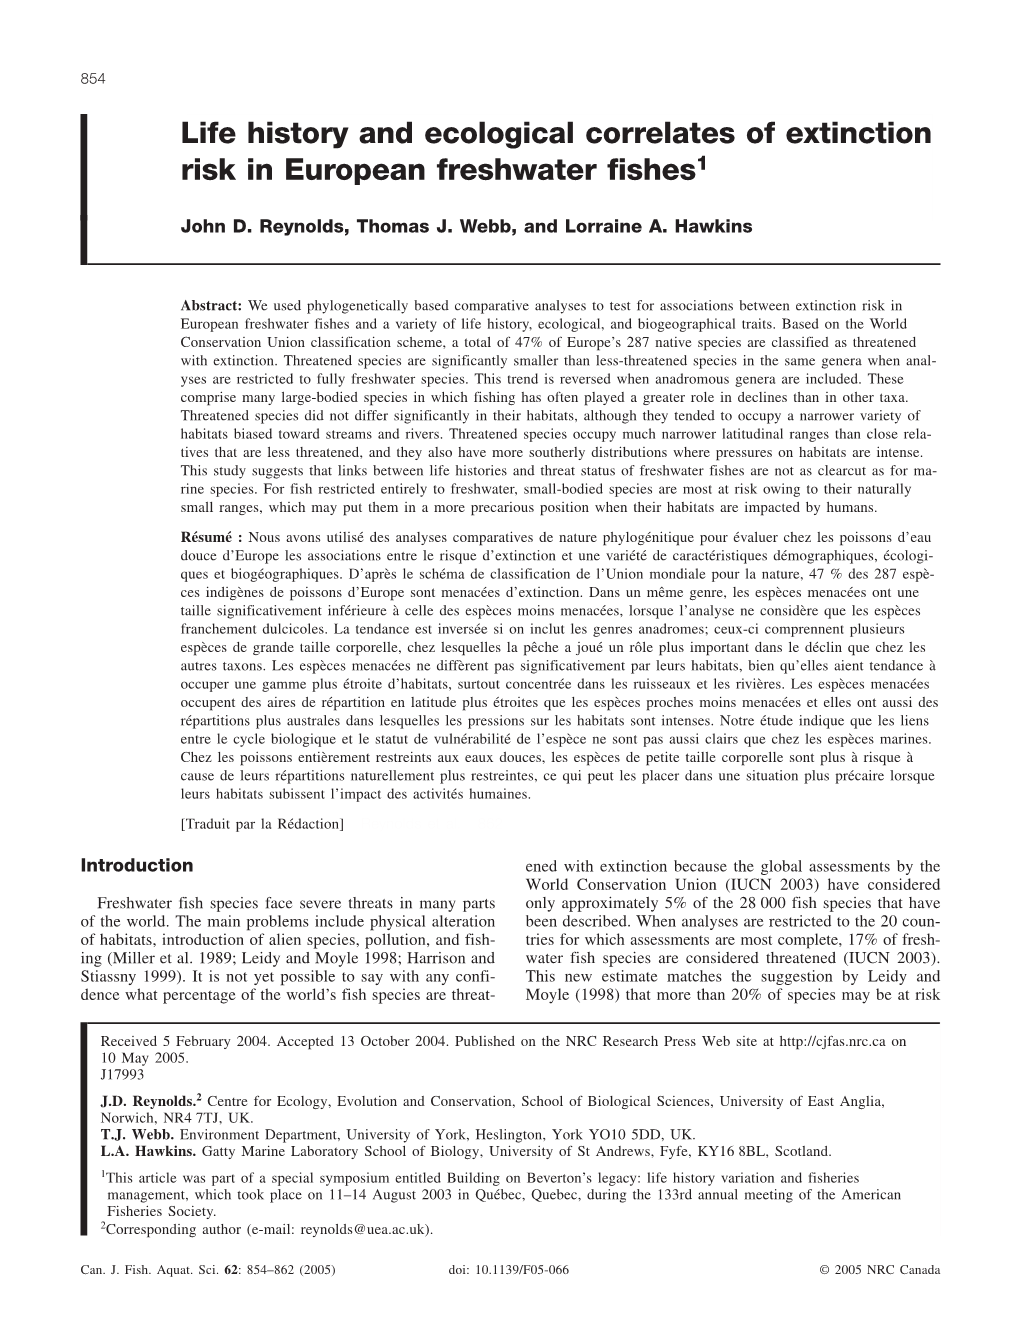 Life History and Ecological Correlates of Extinction Risk in European Freshwater Fishes1